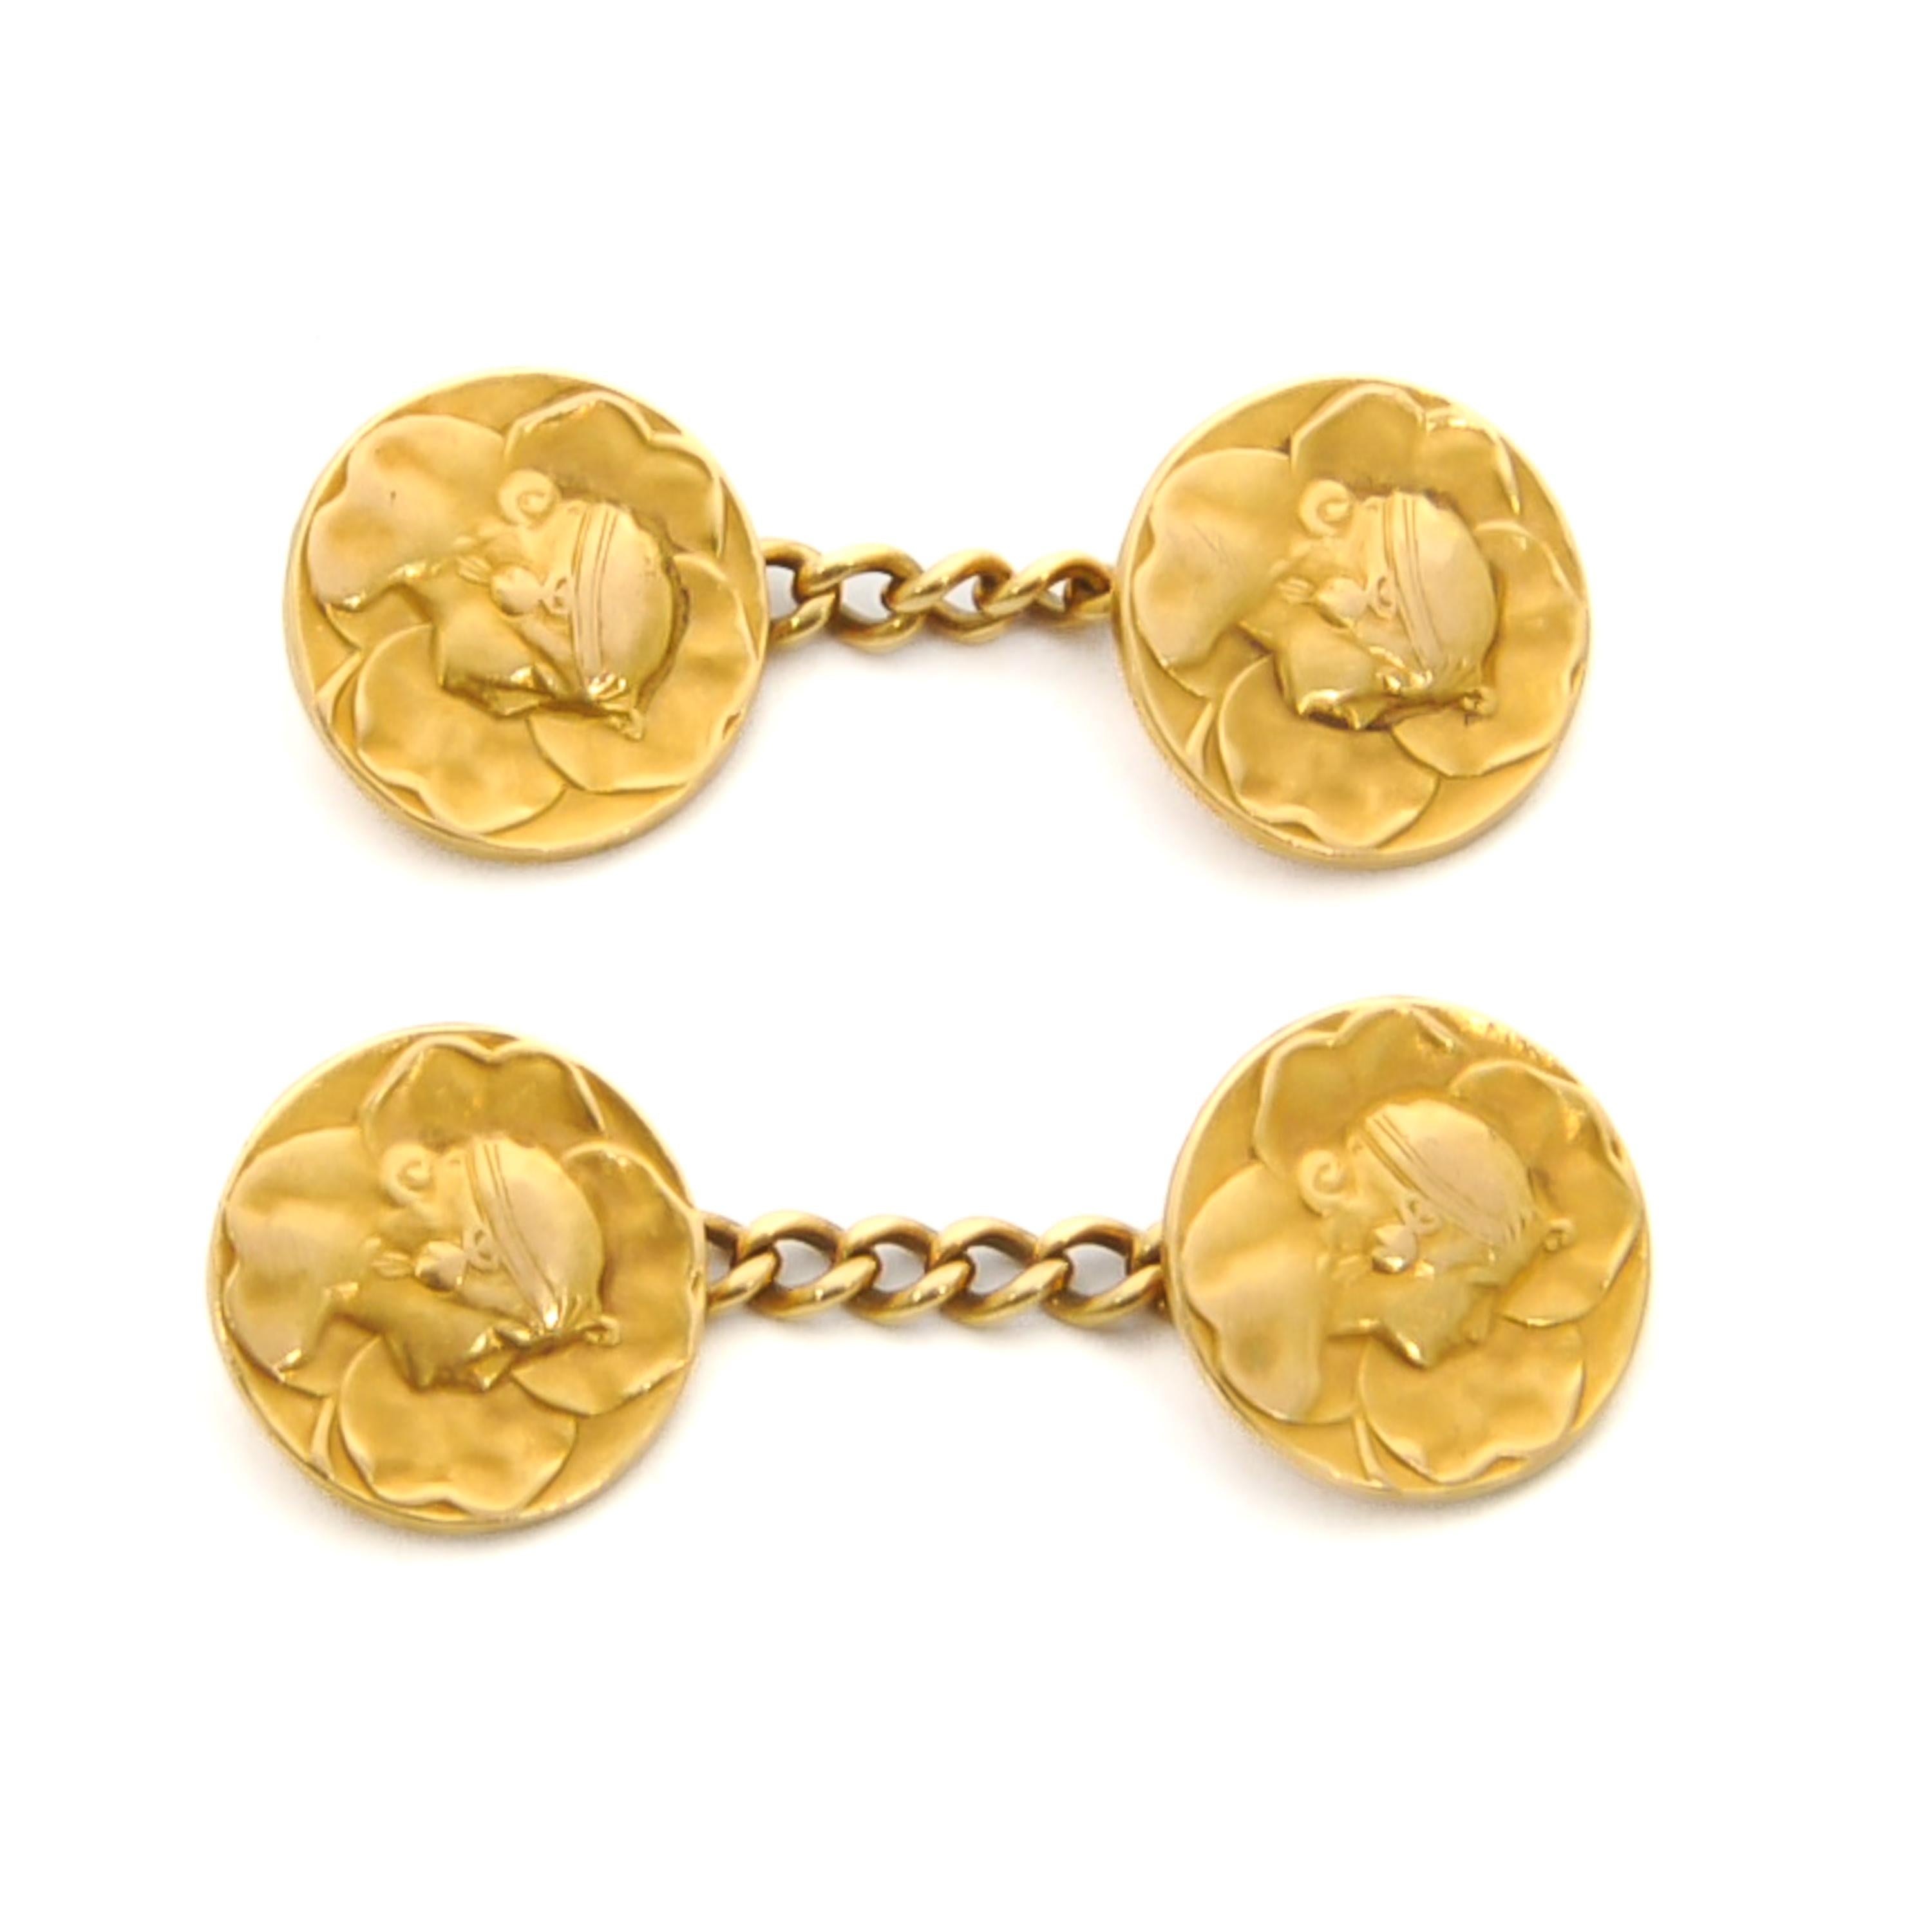 Antique Art Nouveau 18K Gold Carved Cuff Links In Good Condition For Sale In Rotterdam, NL